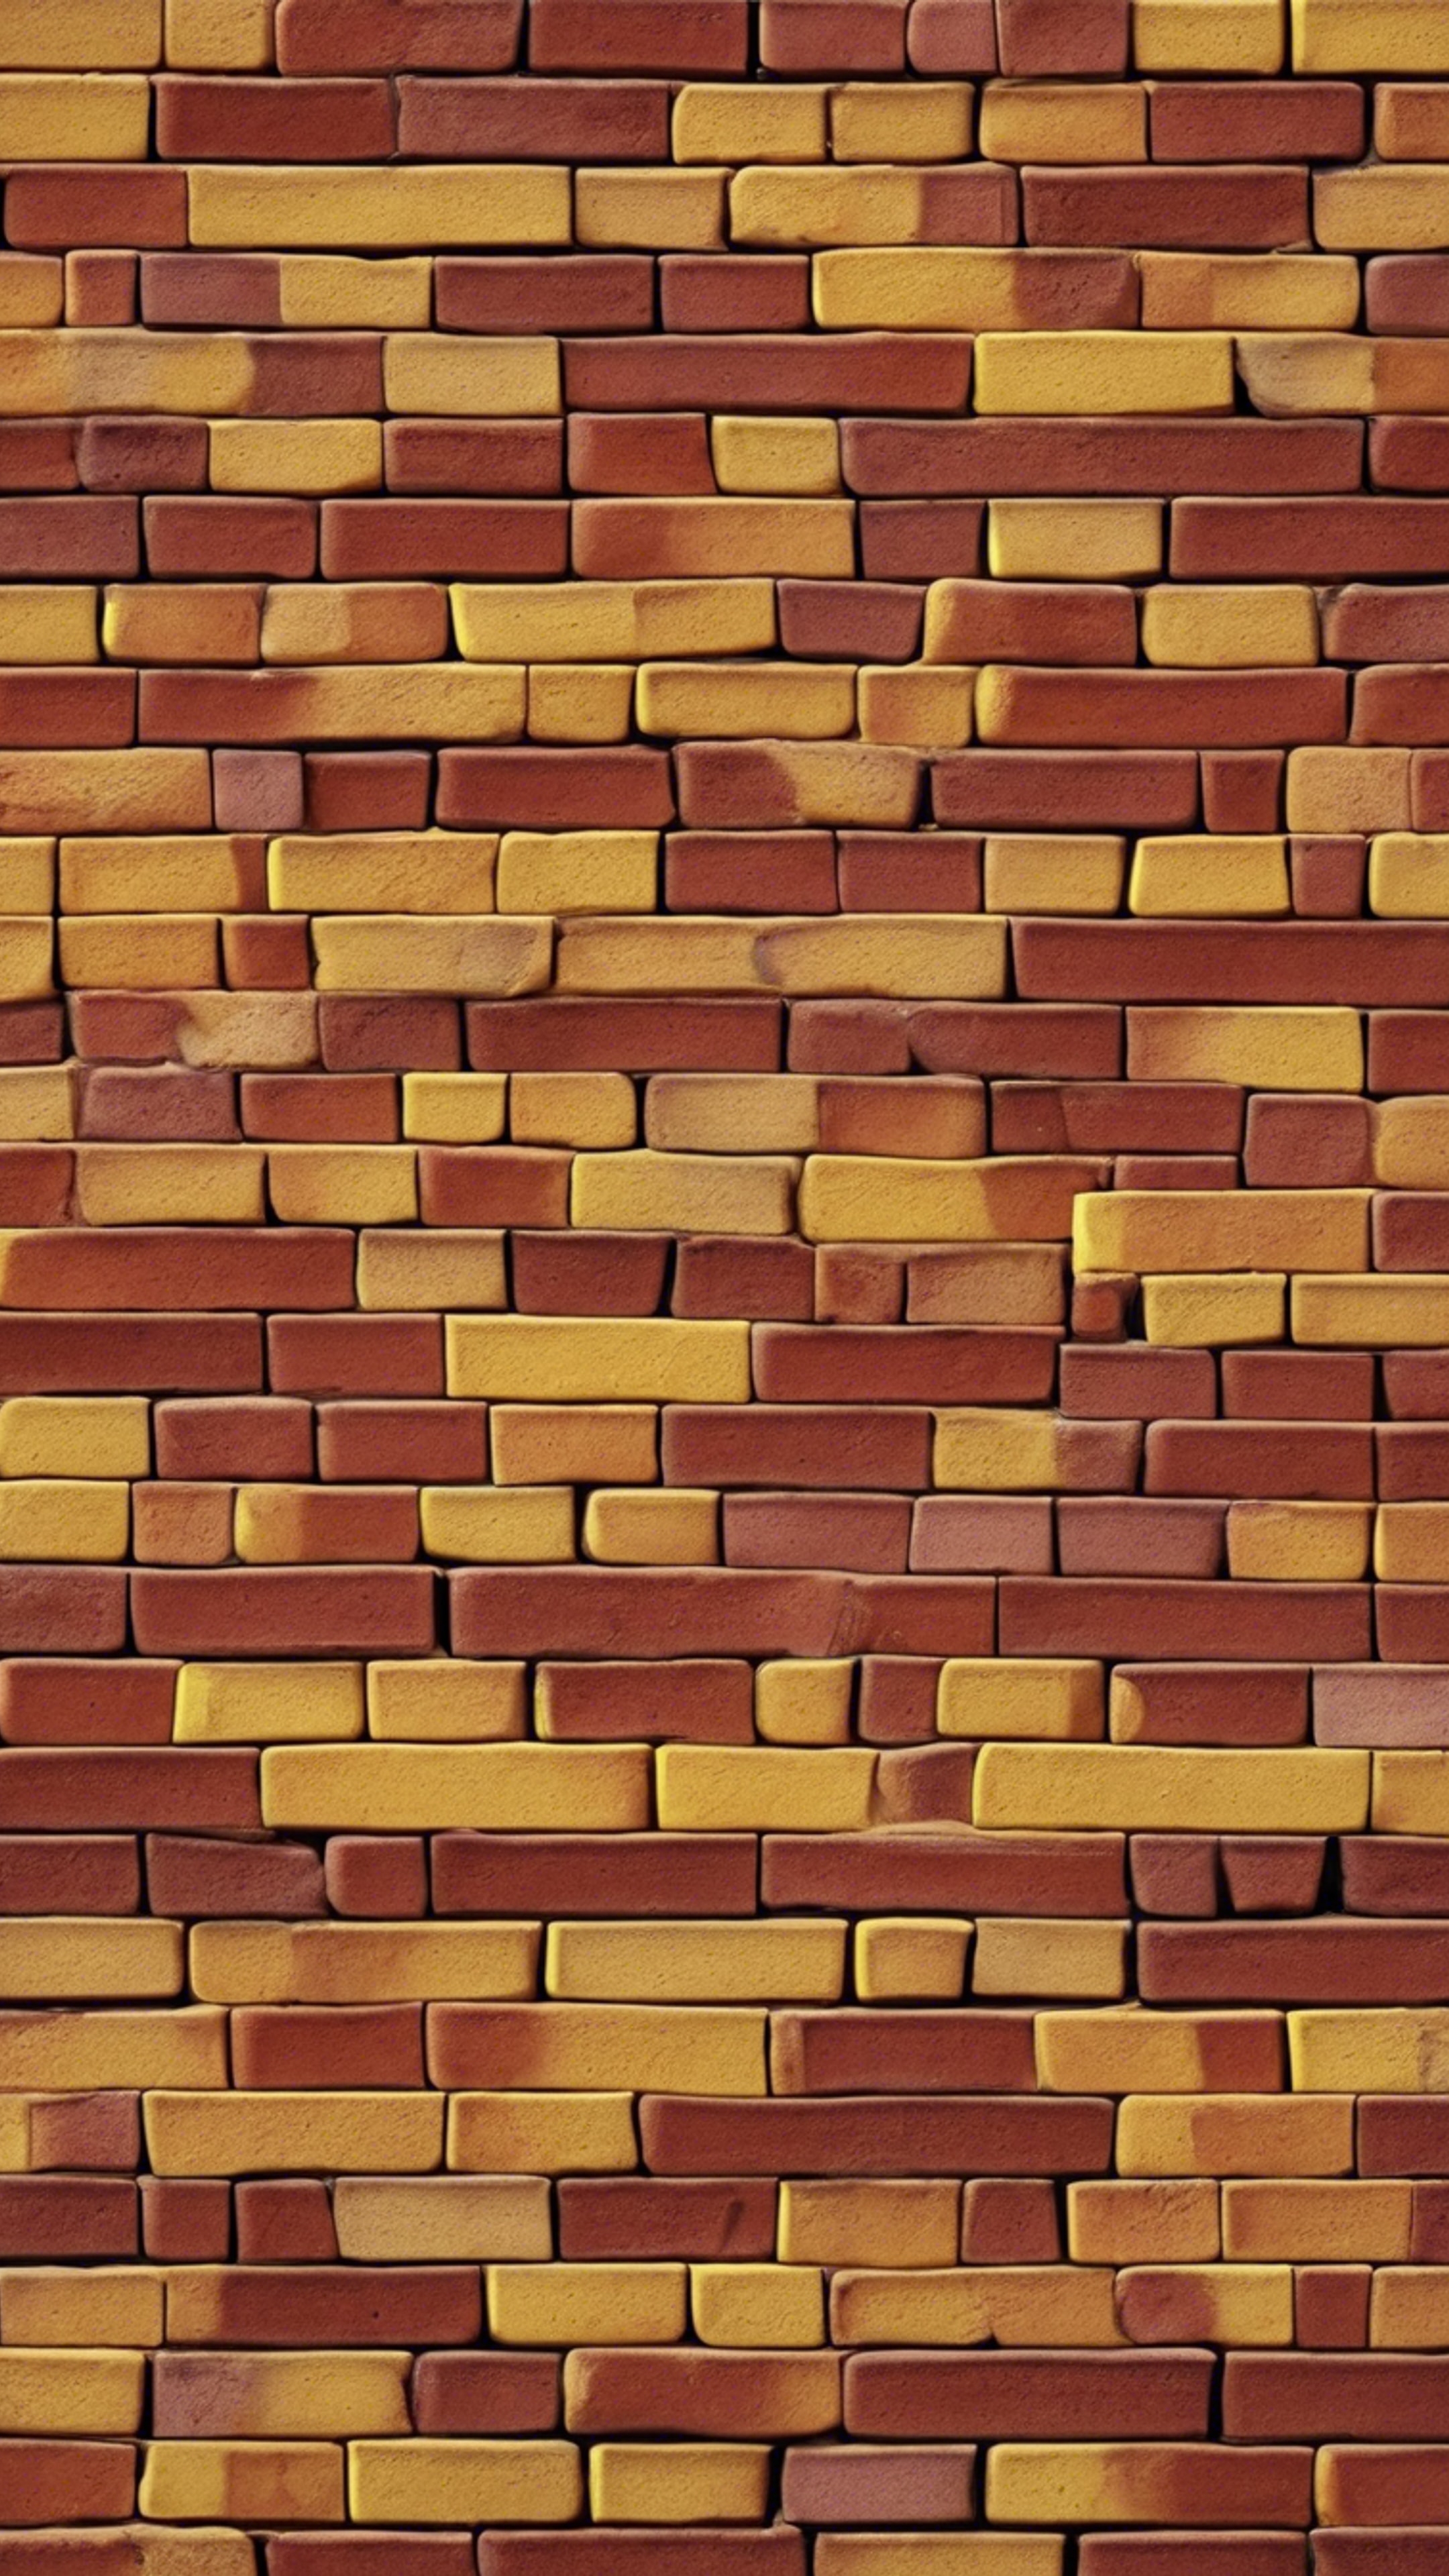 A tight close-up of a seamless, repeating pattern of red and yellow bricks. Тапет[1ac961dc3db44015ab94]